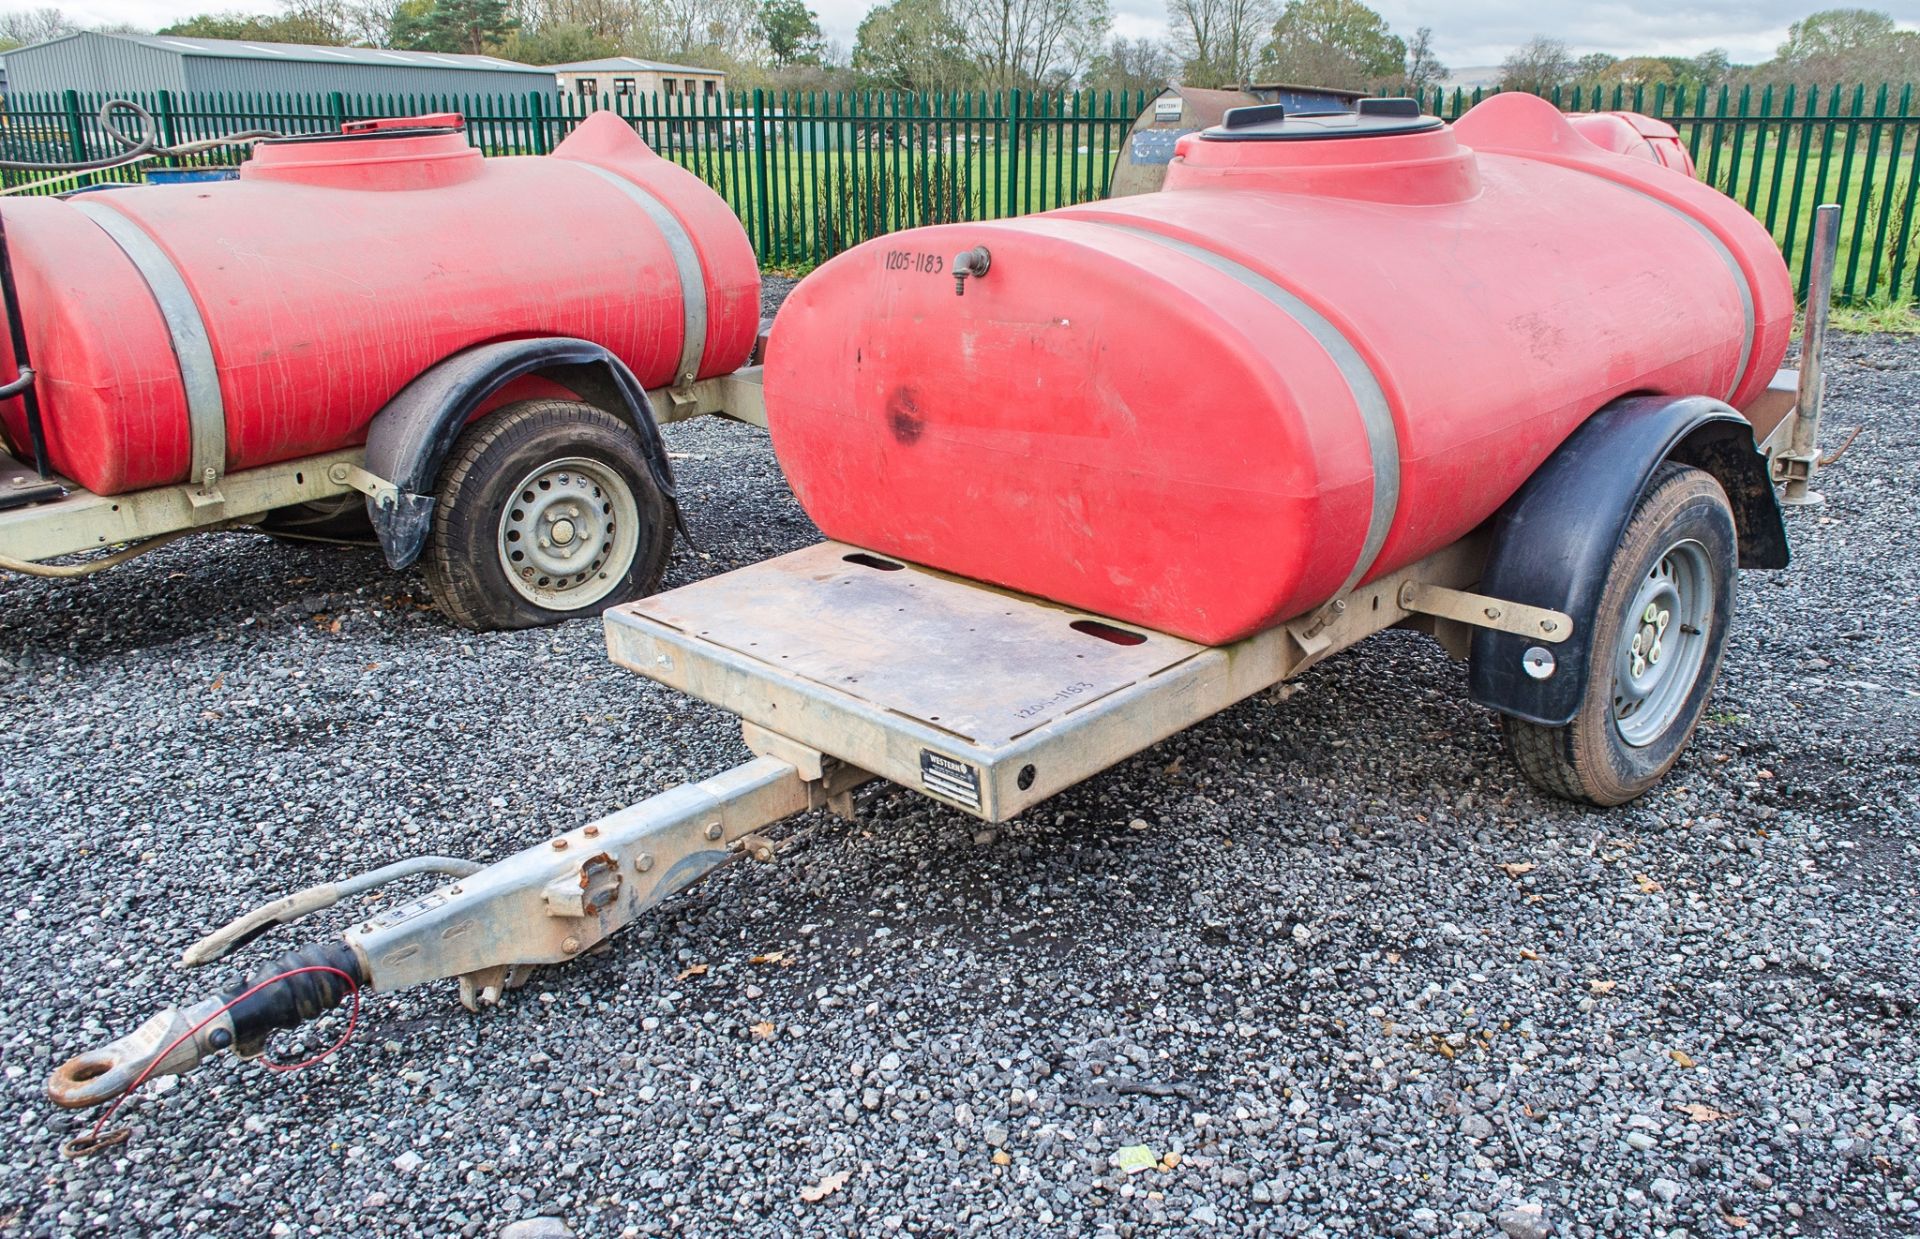 Western fast tow water bowser 12051183